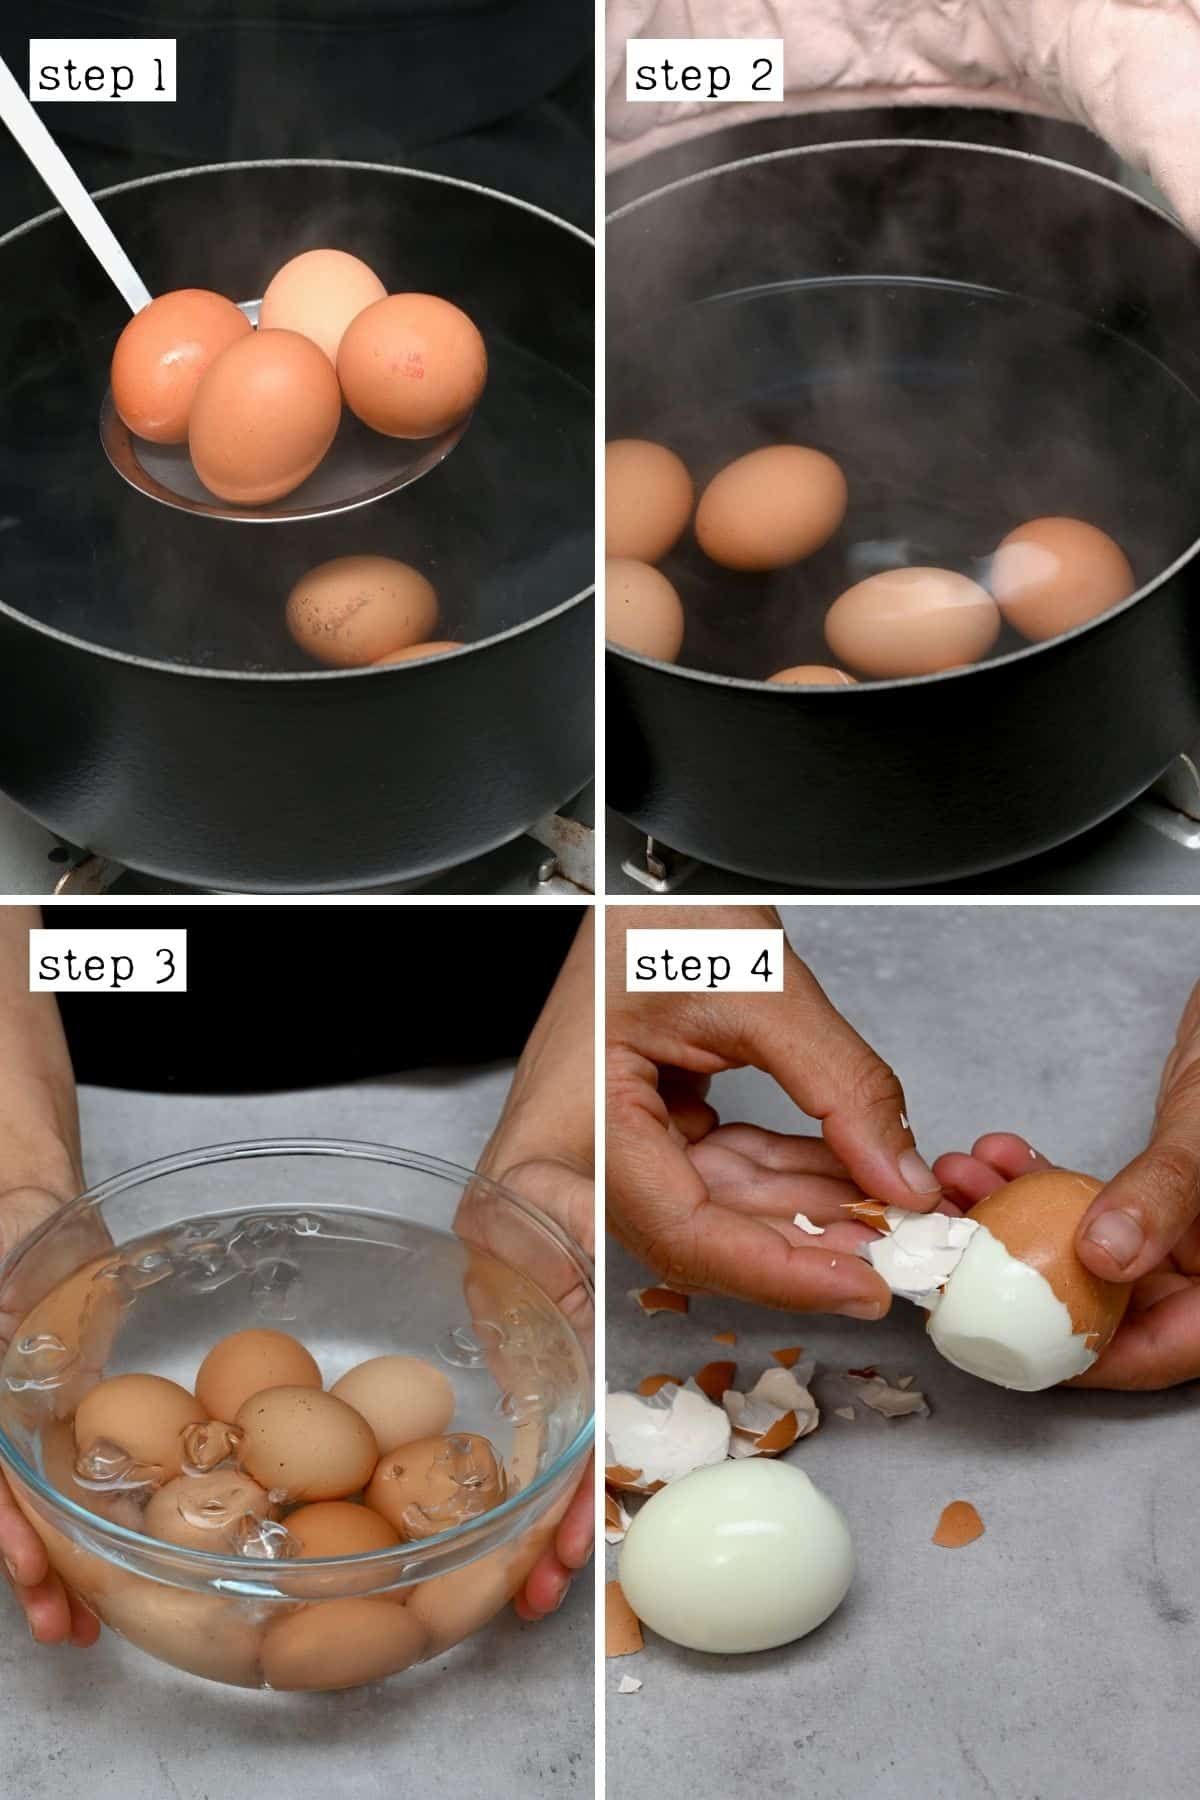 Steps for boiling and peeling eggs